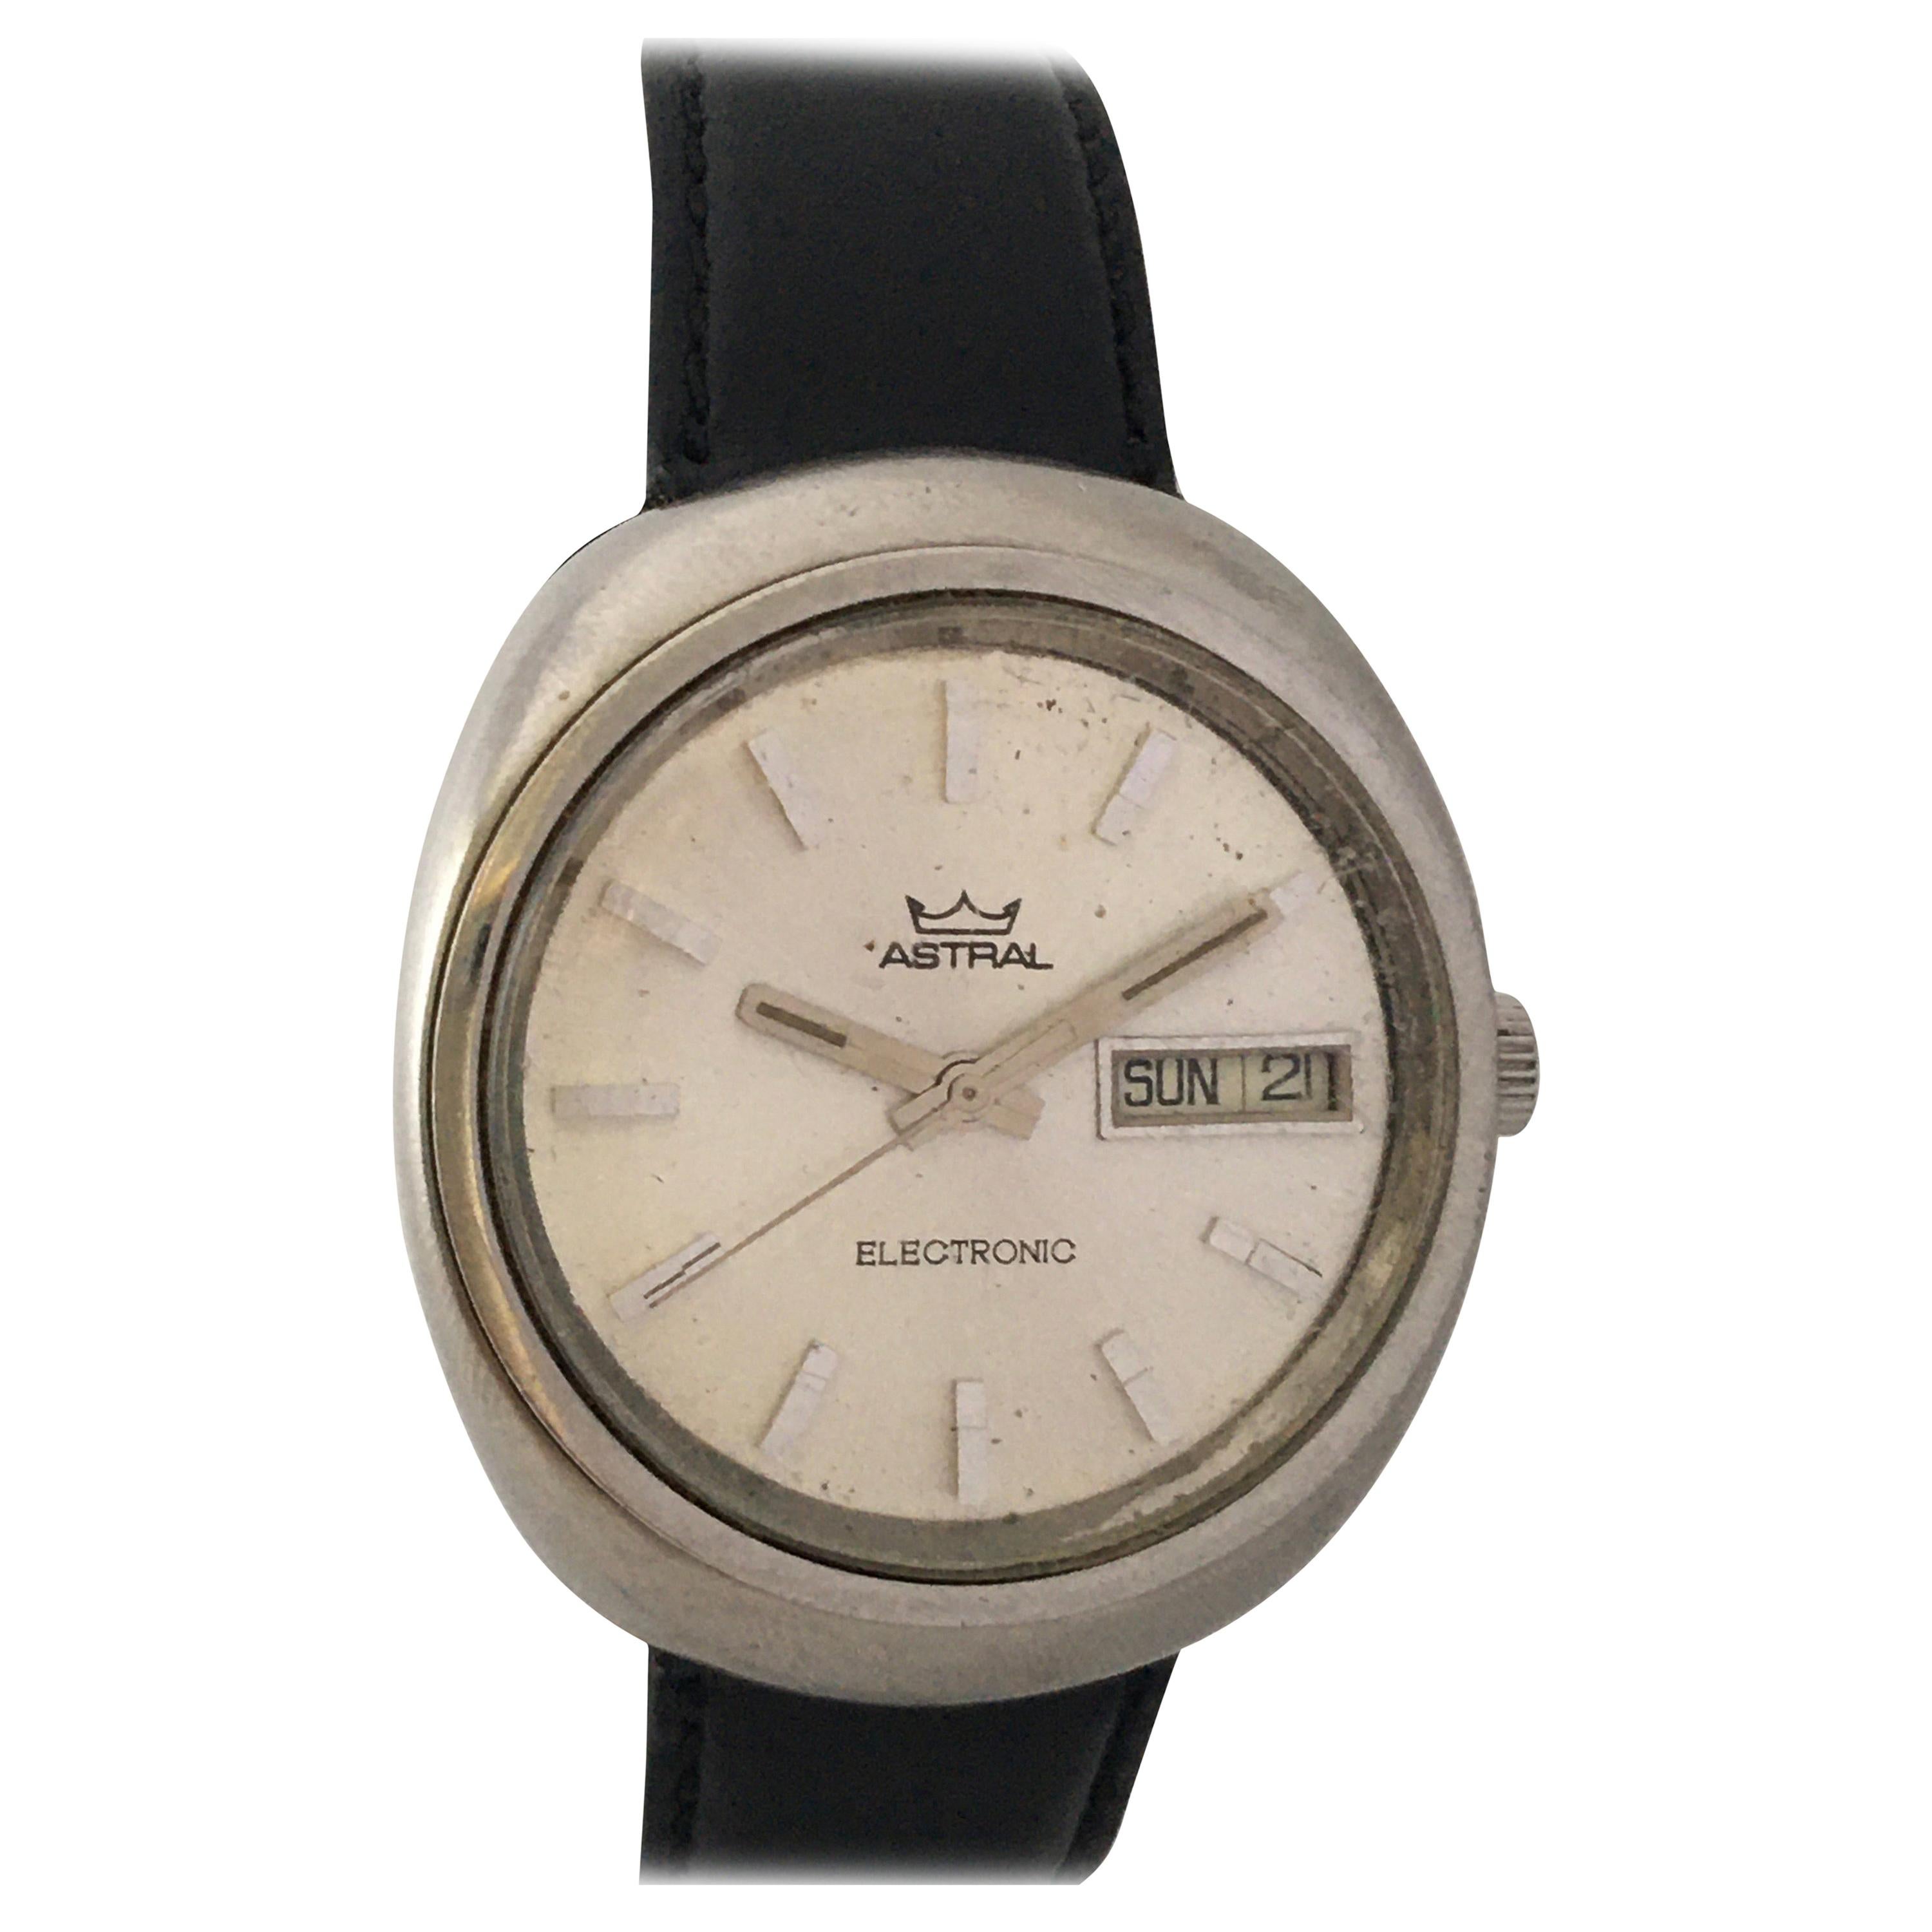 Rare Vintage 1970s ASTRAL Steel Electronic Watch For Sale